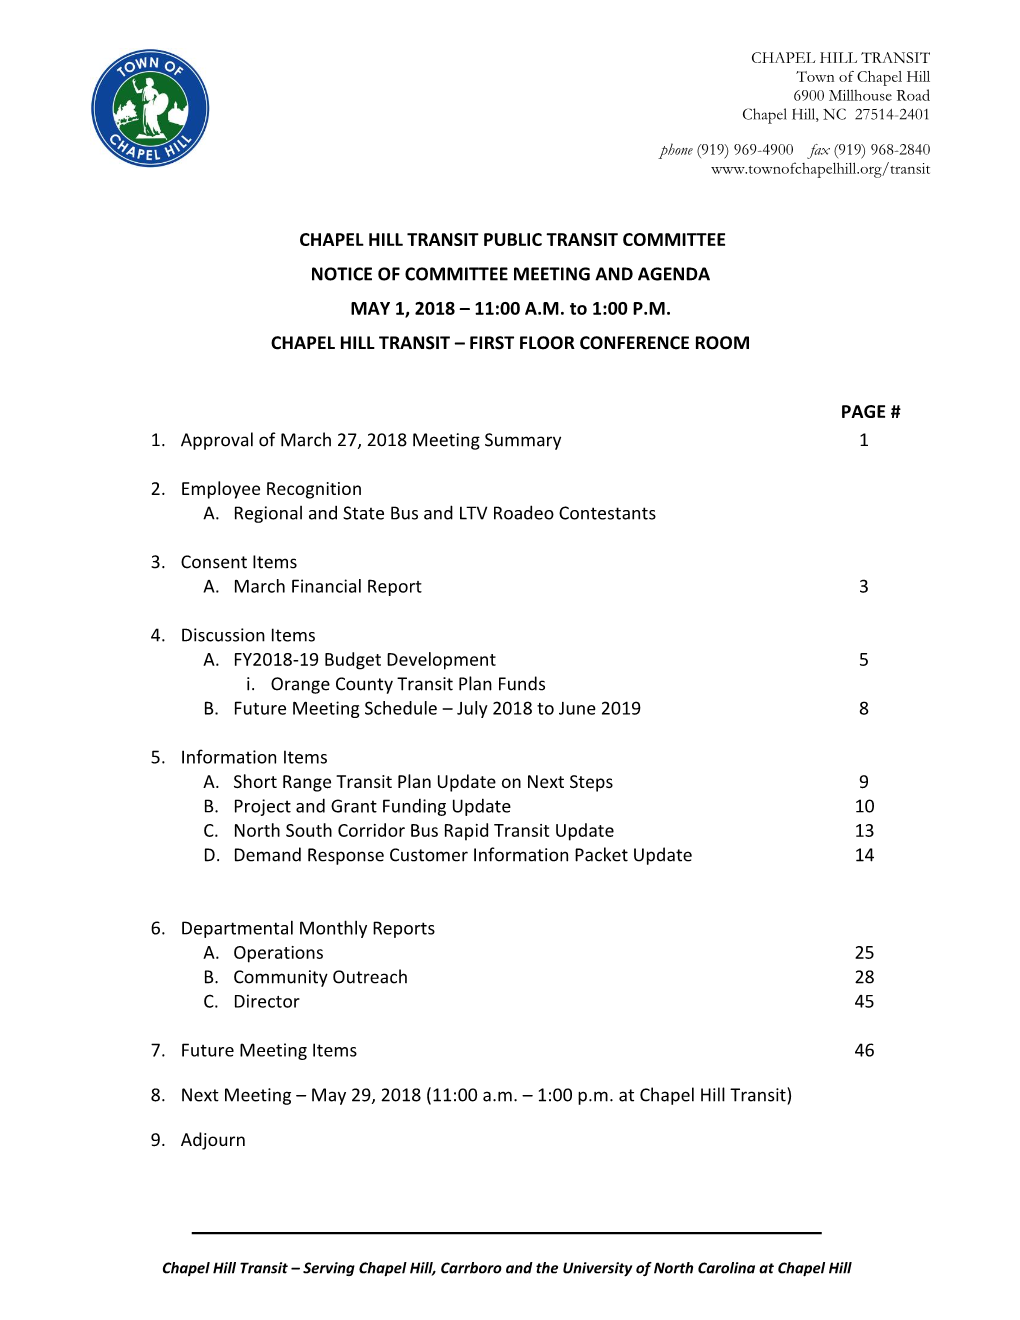 Chapel Hill Transit Public Transit Committee Notice of Committee Meeting and Agenda May 1, 2018 – 11:00 A.M